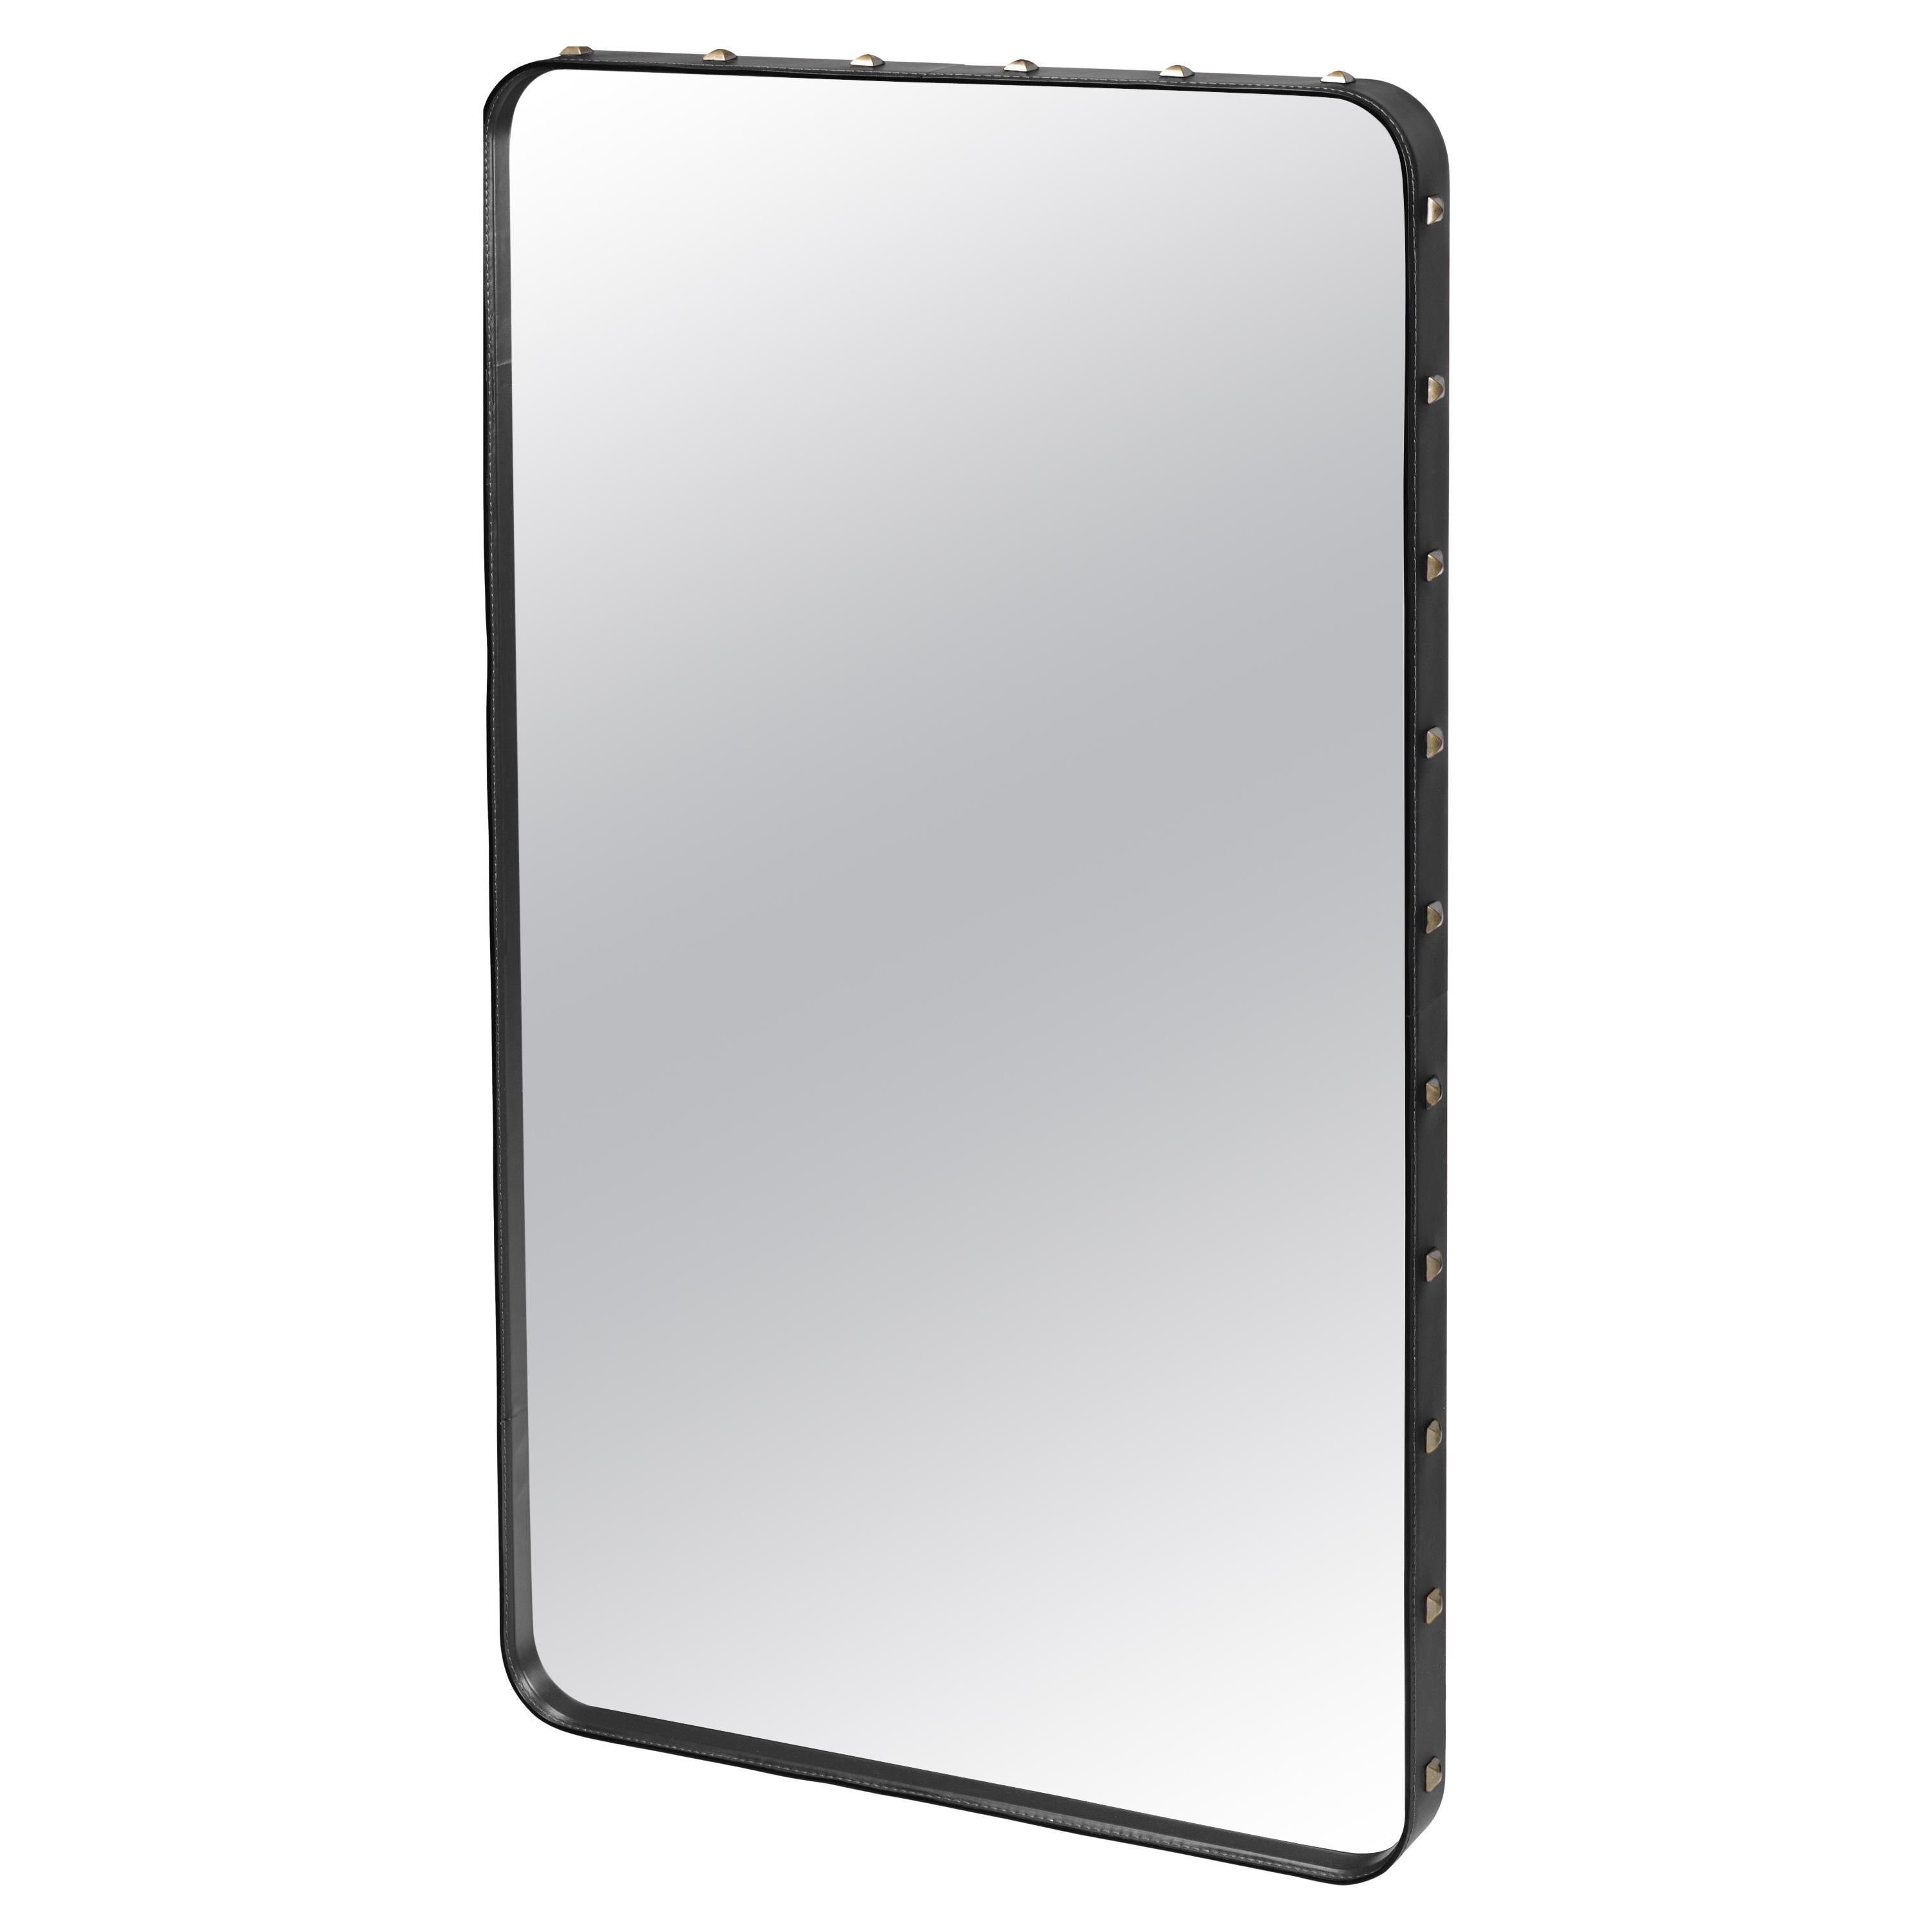 Small Jacques Adnet 'Rectangulaire' Wall Mirror in Black Leather for GUBI